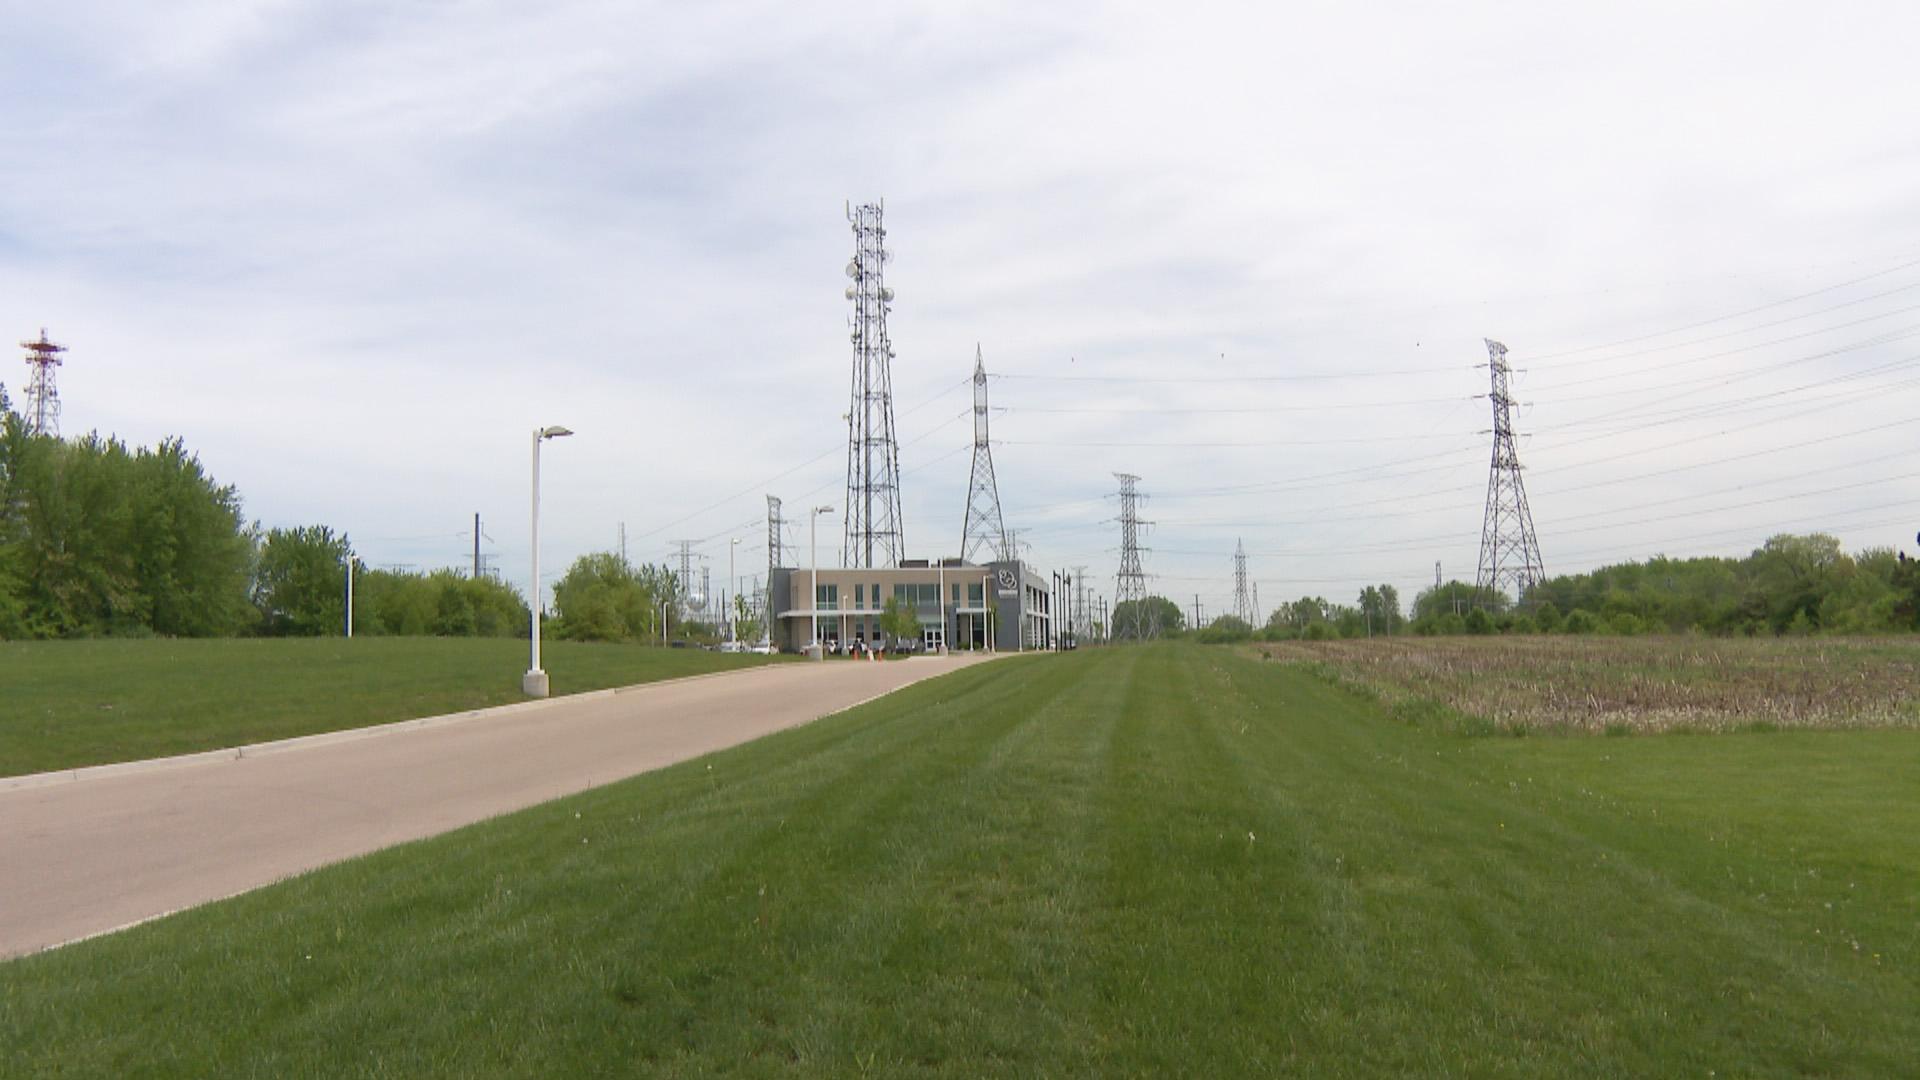 Scientel towers are pictured in Aurora. (WTTW News)